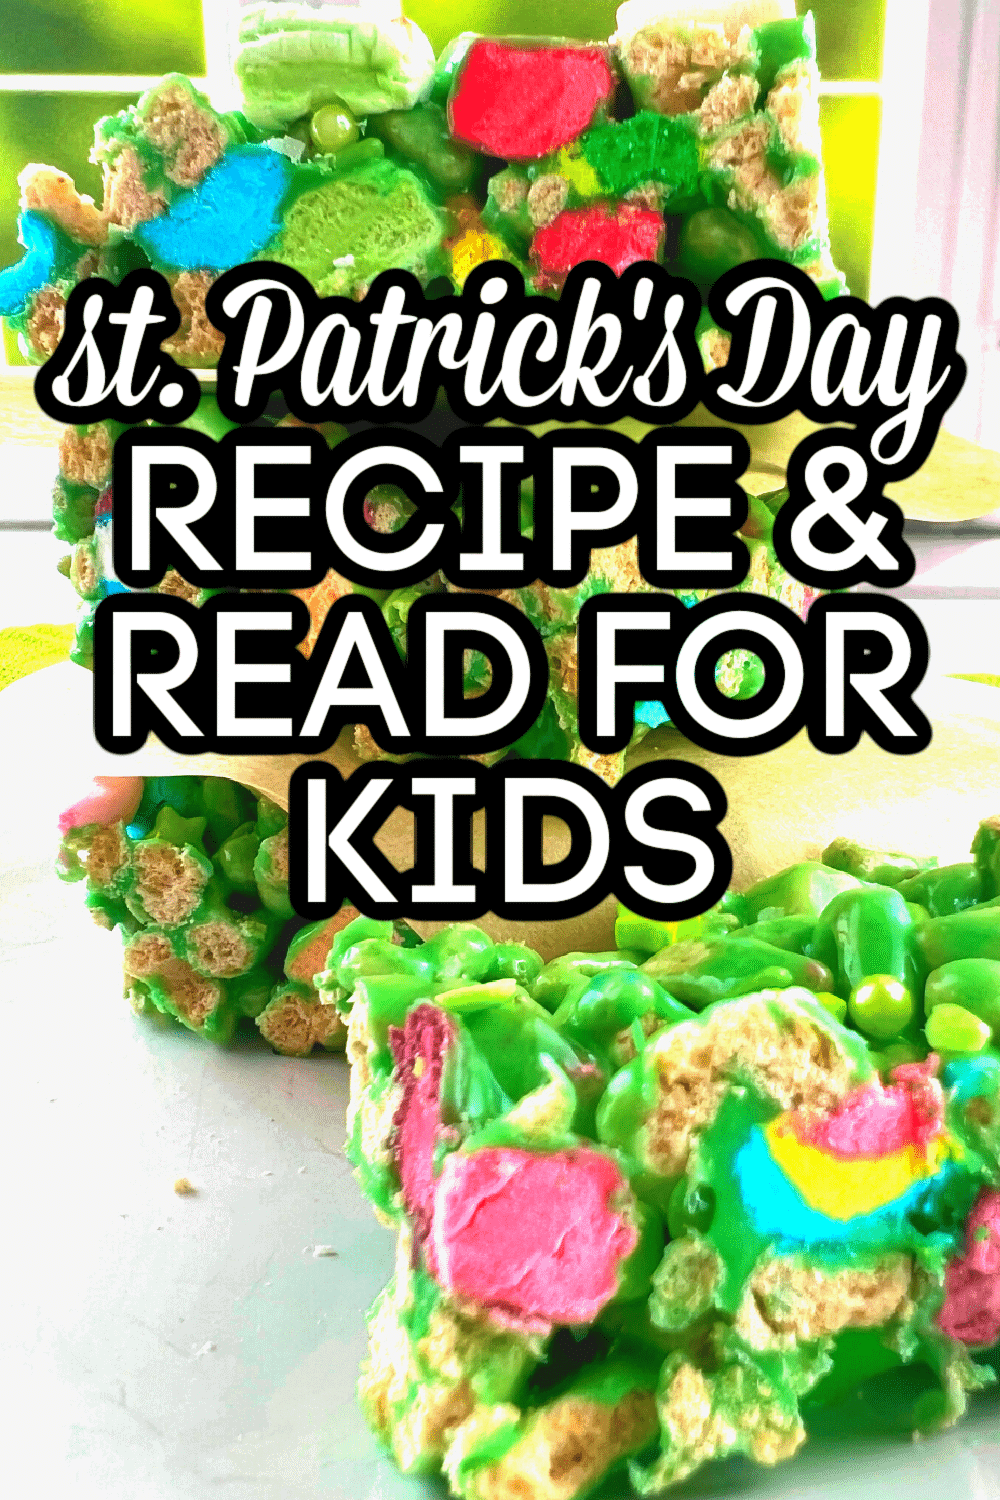 Recipe and Read lucky charms rice krispies treats with Saint Patricks Day kids books (how to make lucky charms rice krispies treats with kids) text over lucky charms cereal bars stacked in front of a window